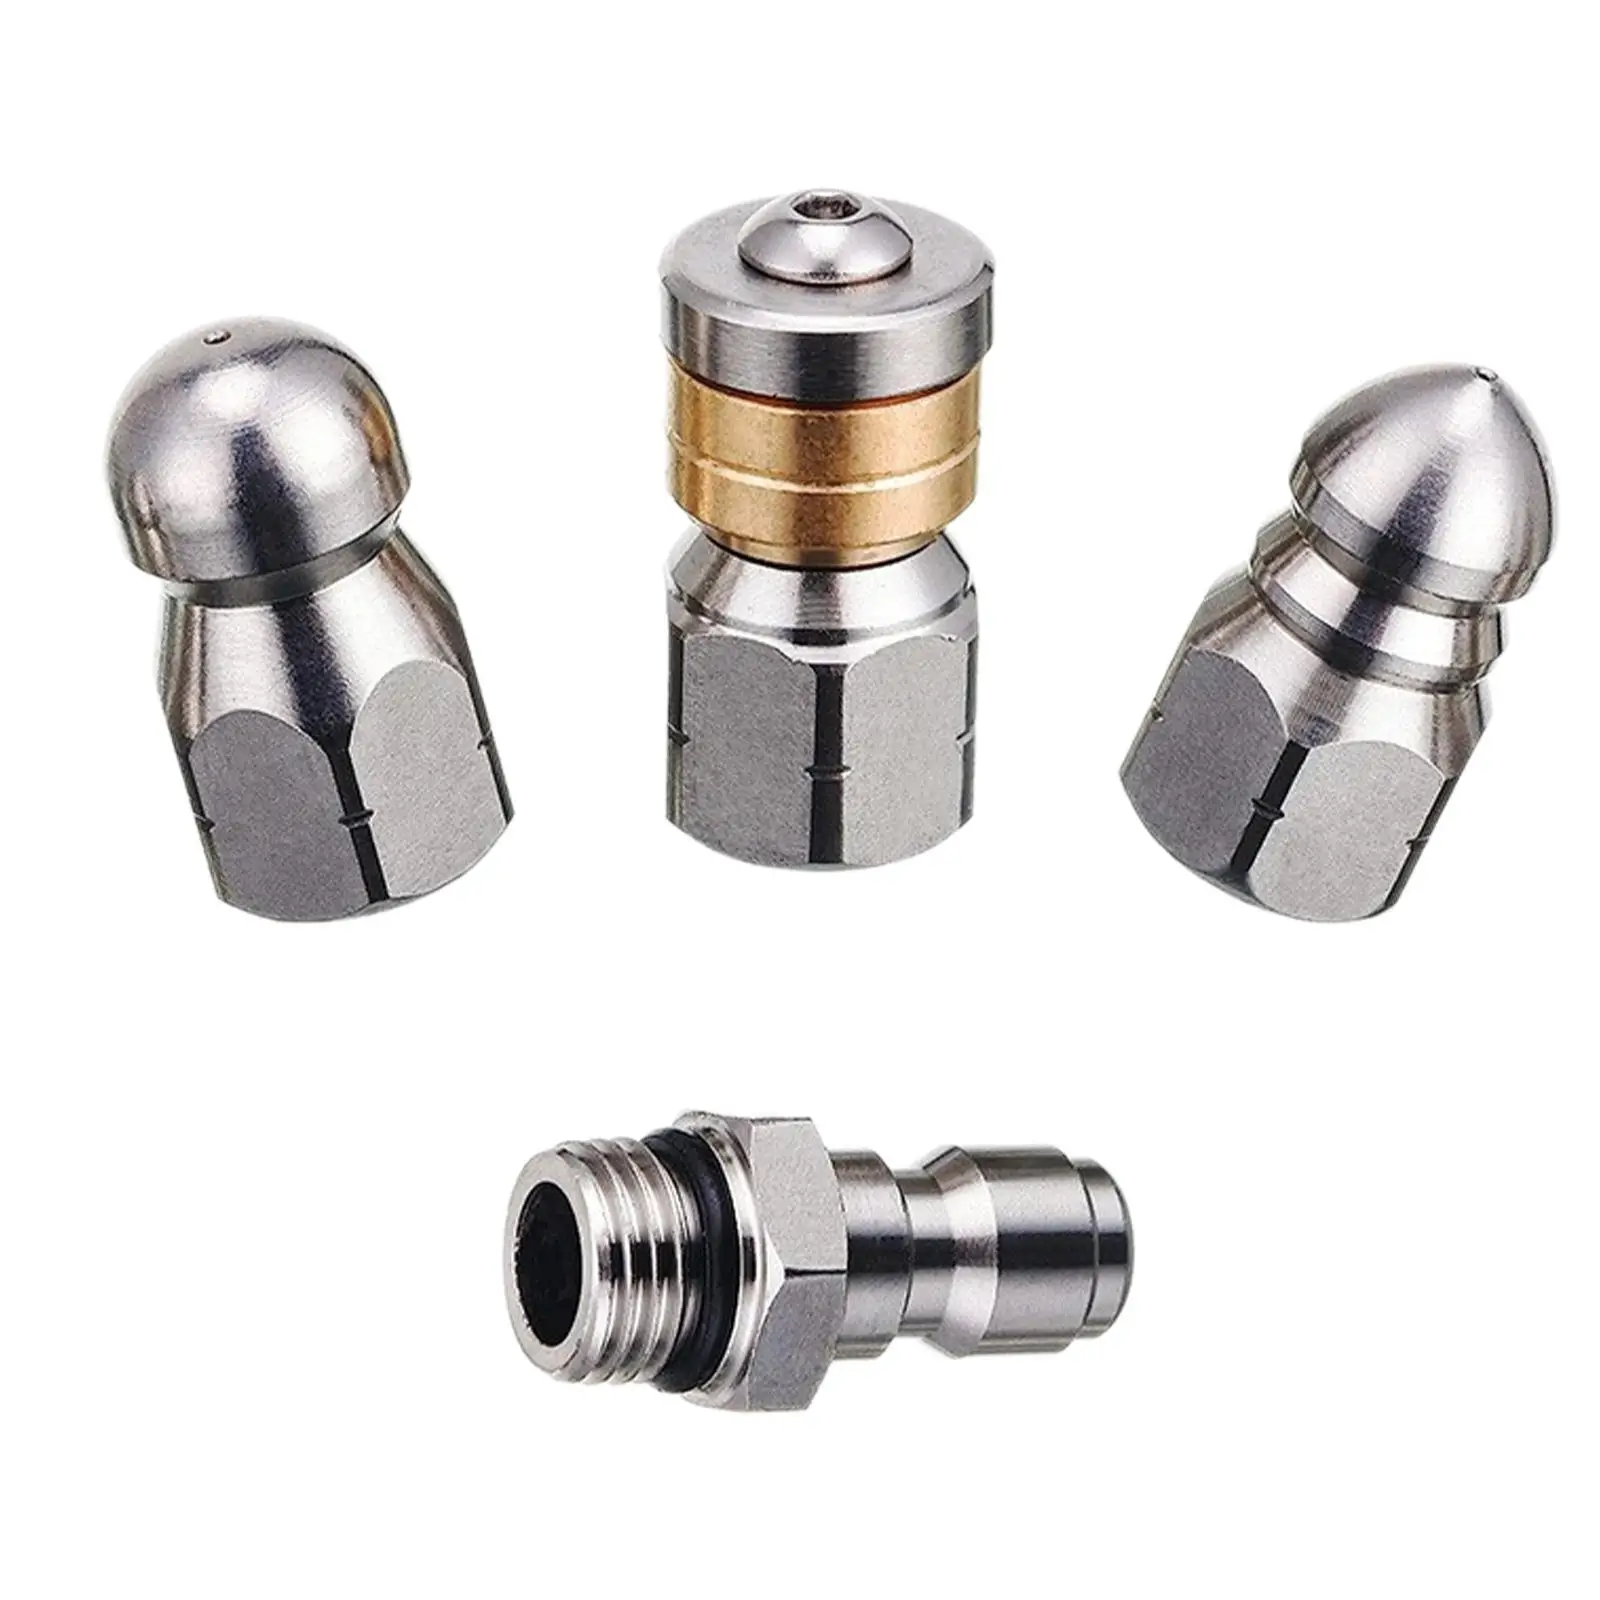 Sewer Jetting Nozzle Sewer Pipe Cleaner Nozzle Pressure Washer Sewer Jetter Kit 1/4 inch NPT for Outdoor Kitchen Pipeline Garden